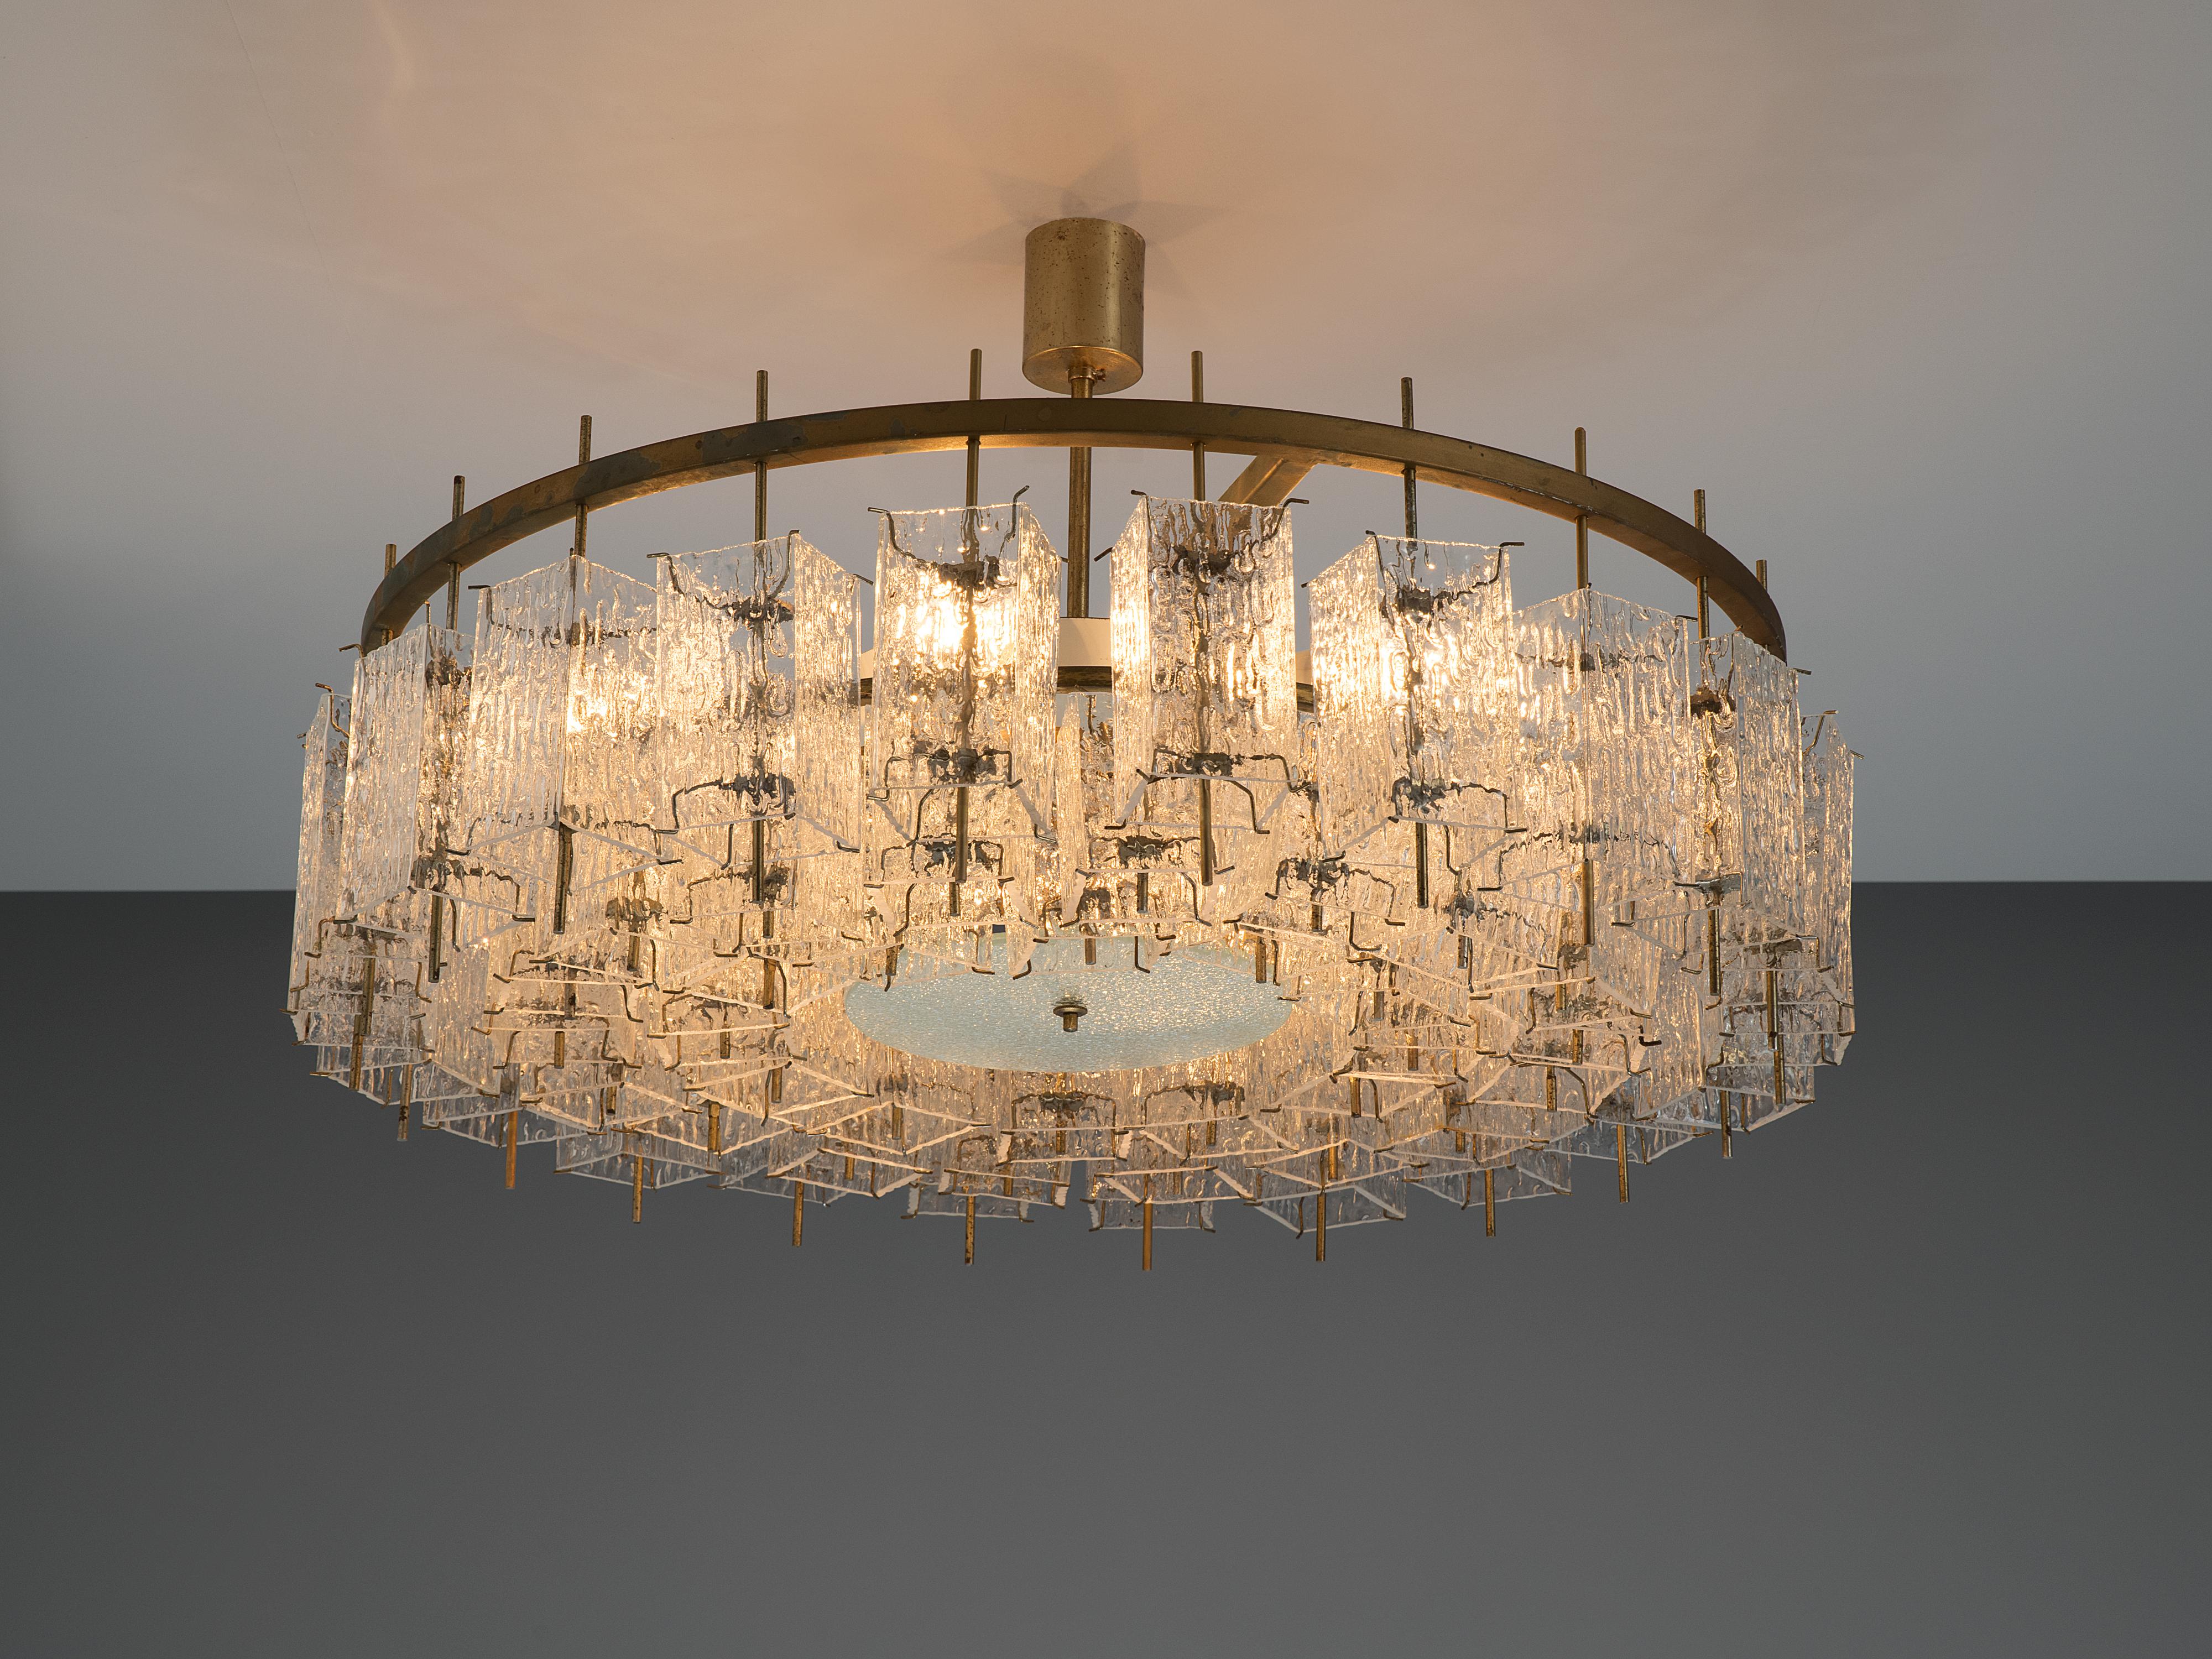 Chandelier, glass, brass, Europe, 1970s. 

Round chandelier with a great amount of rectangular structured glass shades. The frame is made of brass and holds numerous structured glass 'tubes' with a brass center. Due the combination of materials